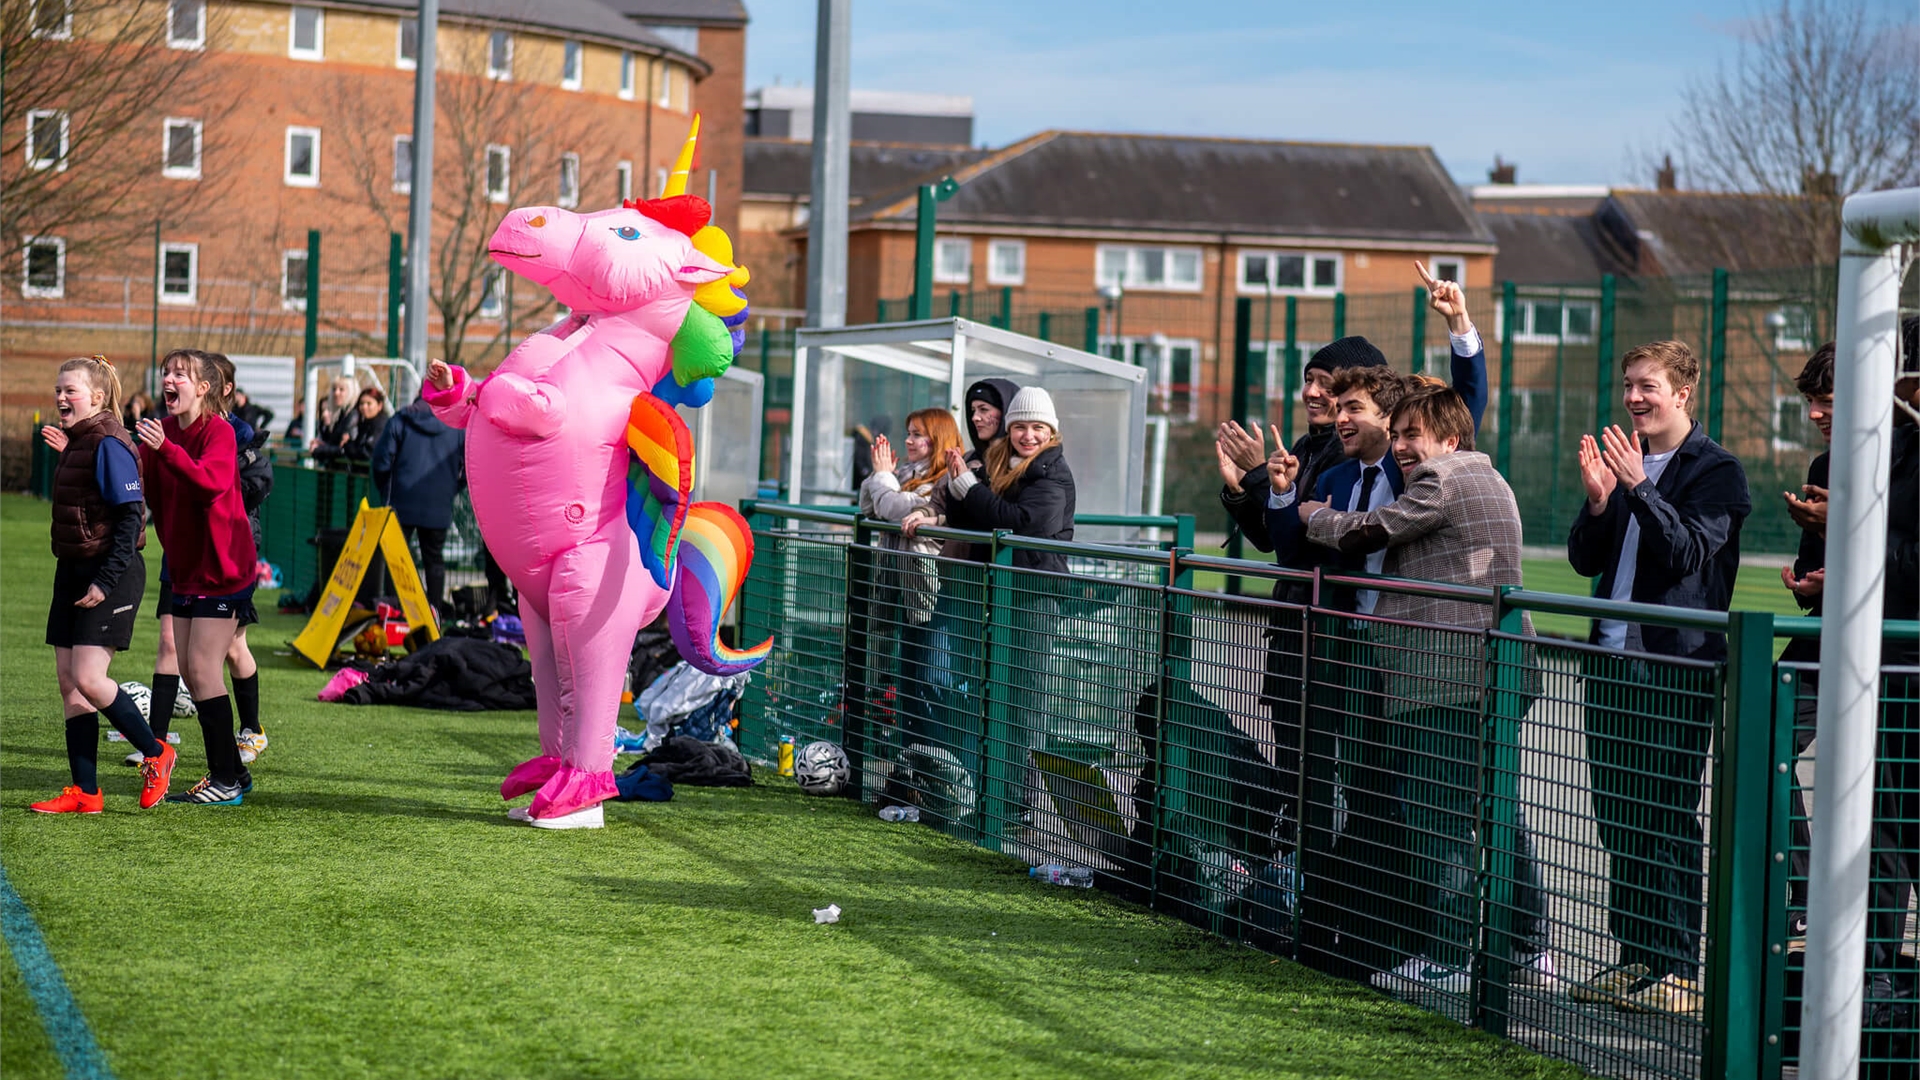 A pink unicorn stands clapping on a field of grass with spectators behind a fence.